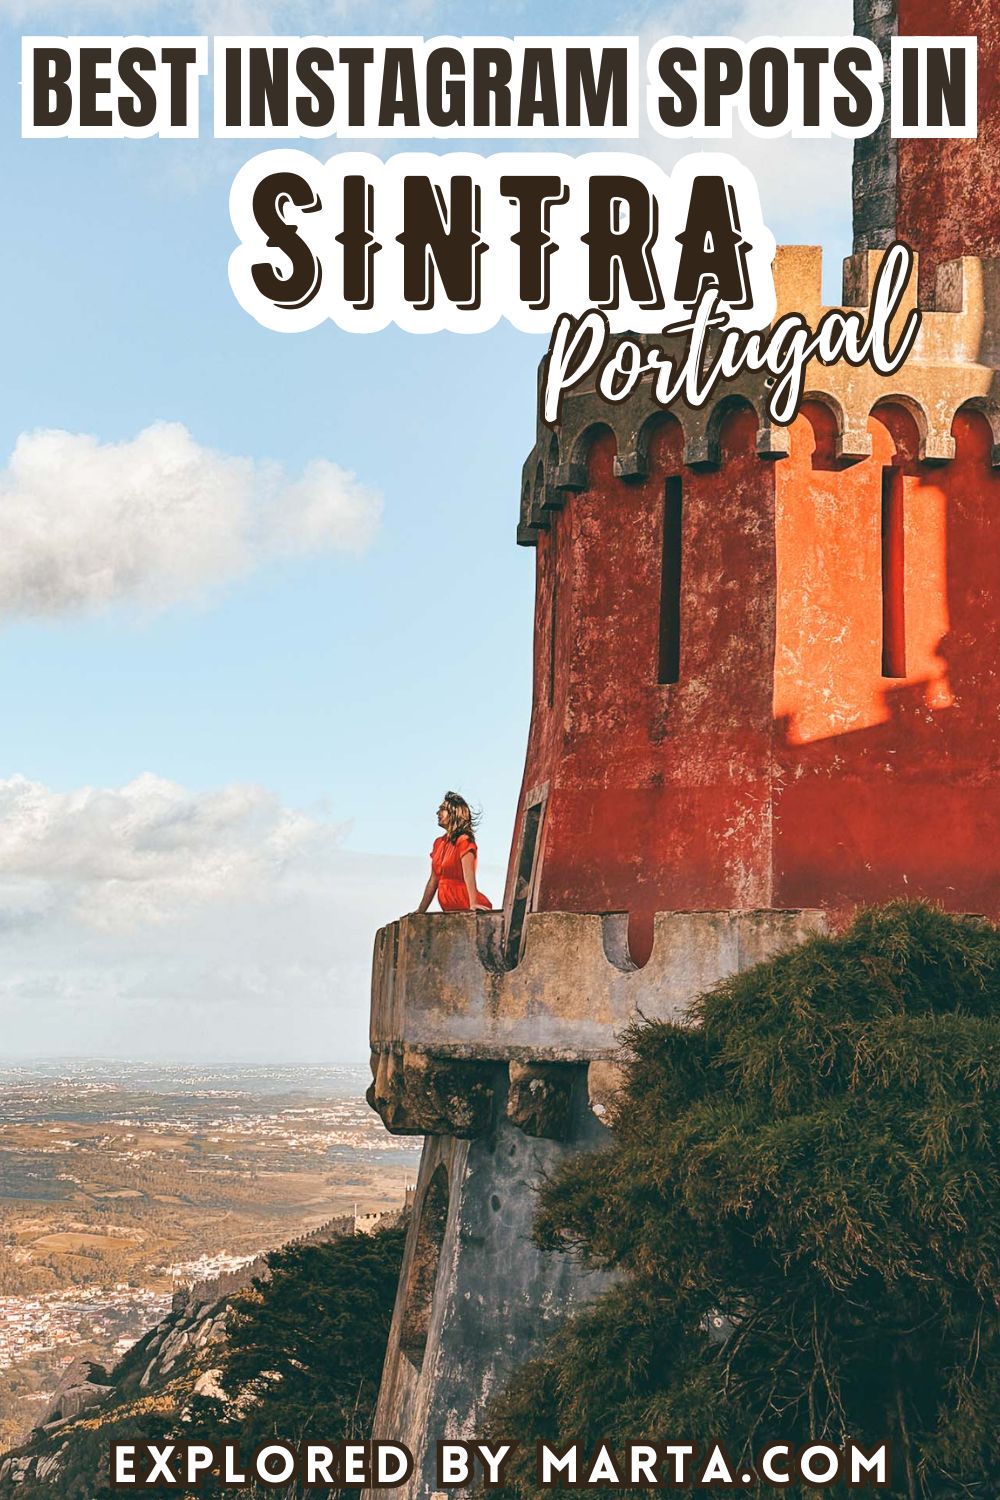 Sintra Instagram spots - most Instagrammable places in Sintra, Portugal